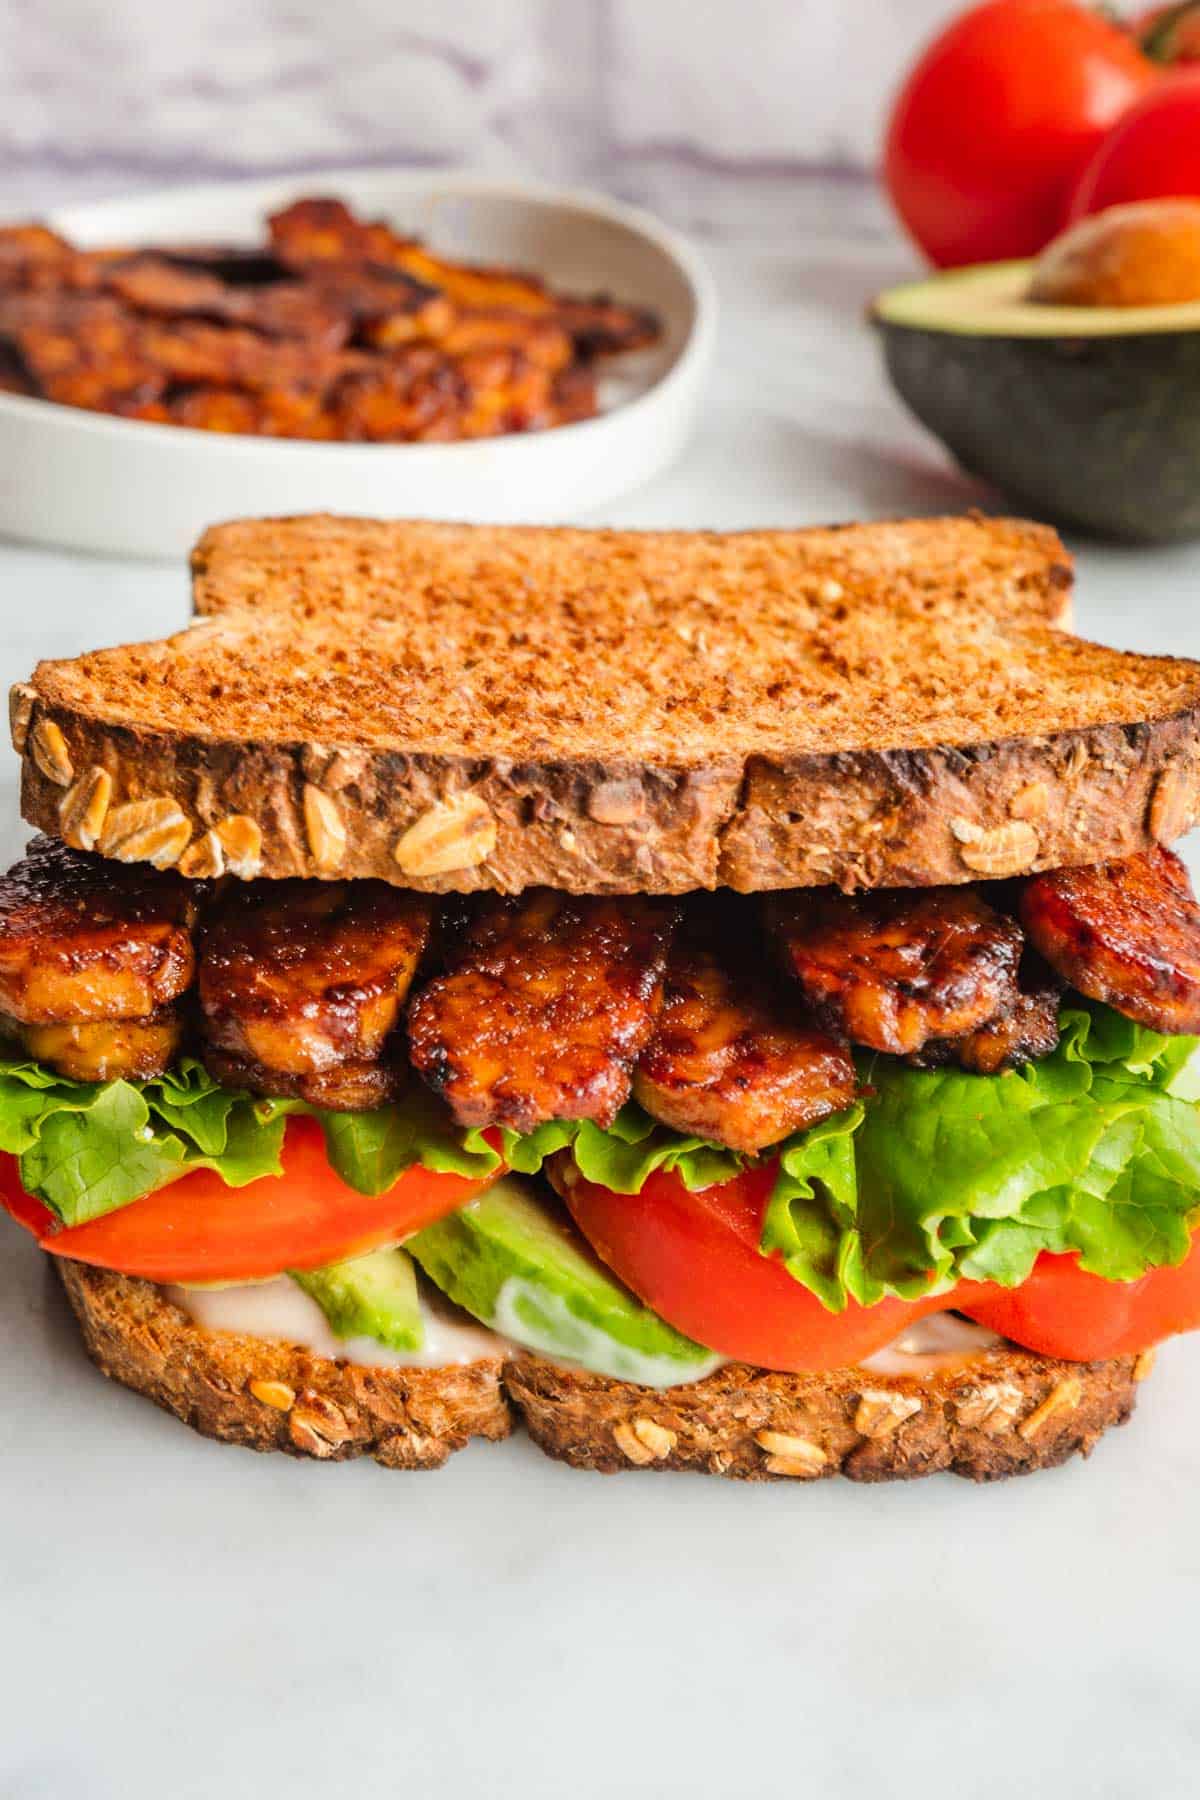 Vegan tempeh sandwich with tomato, lettuce, wholegrain bread, and avocado with a plate of tempeh bacon, one half avocado, and vine tomatoes in the background.